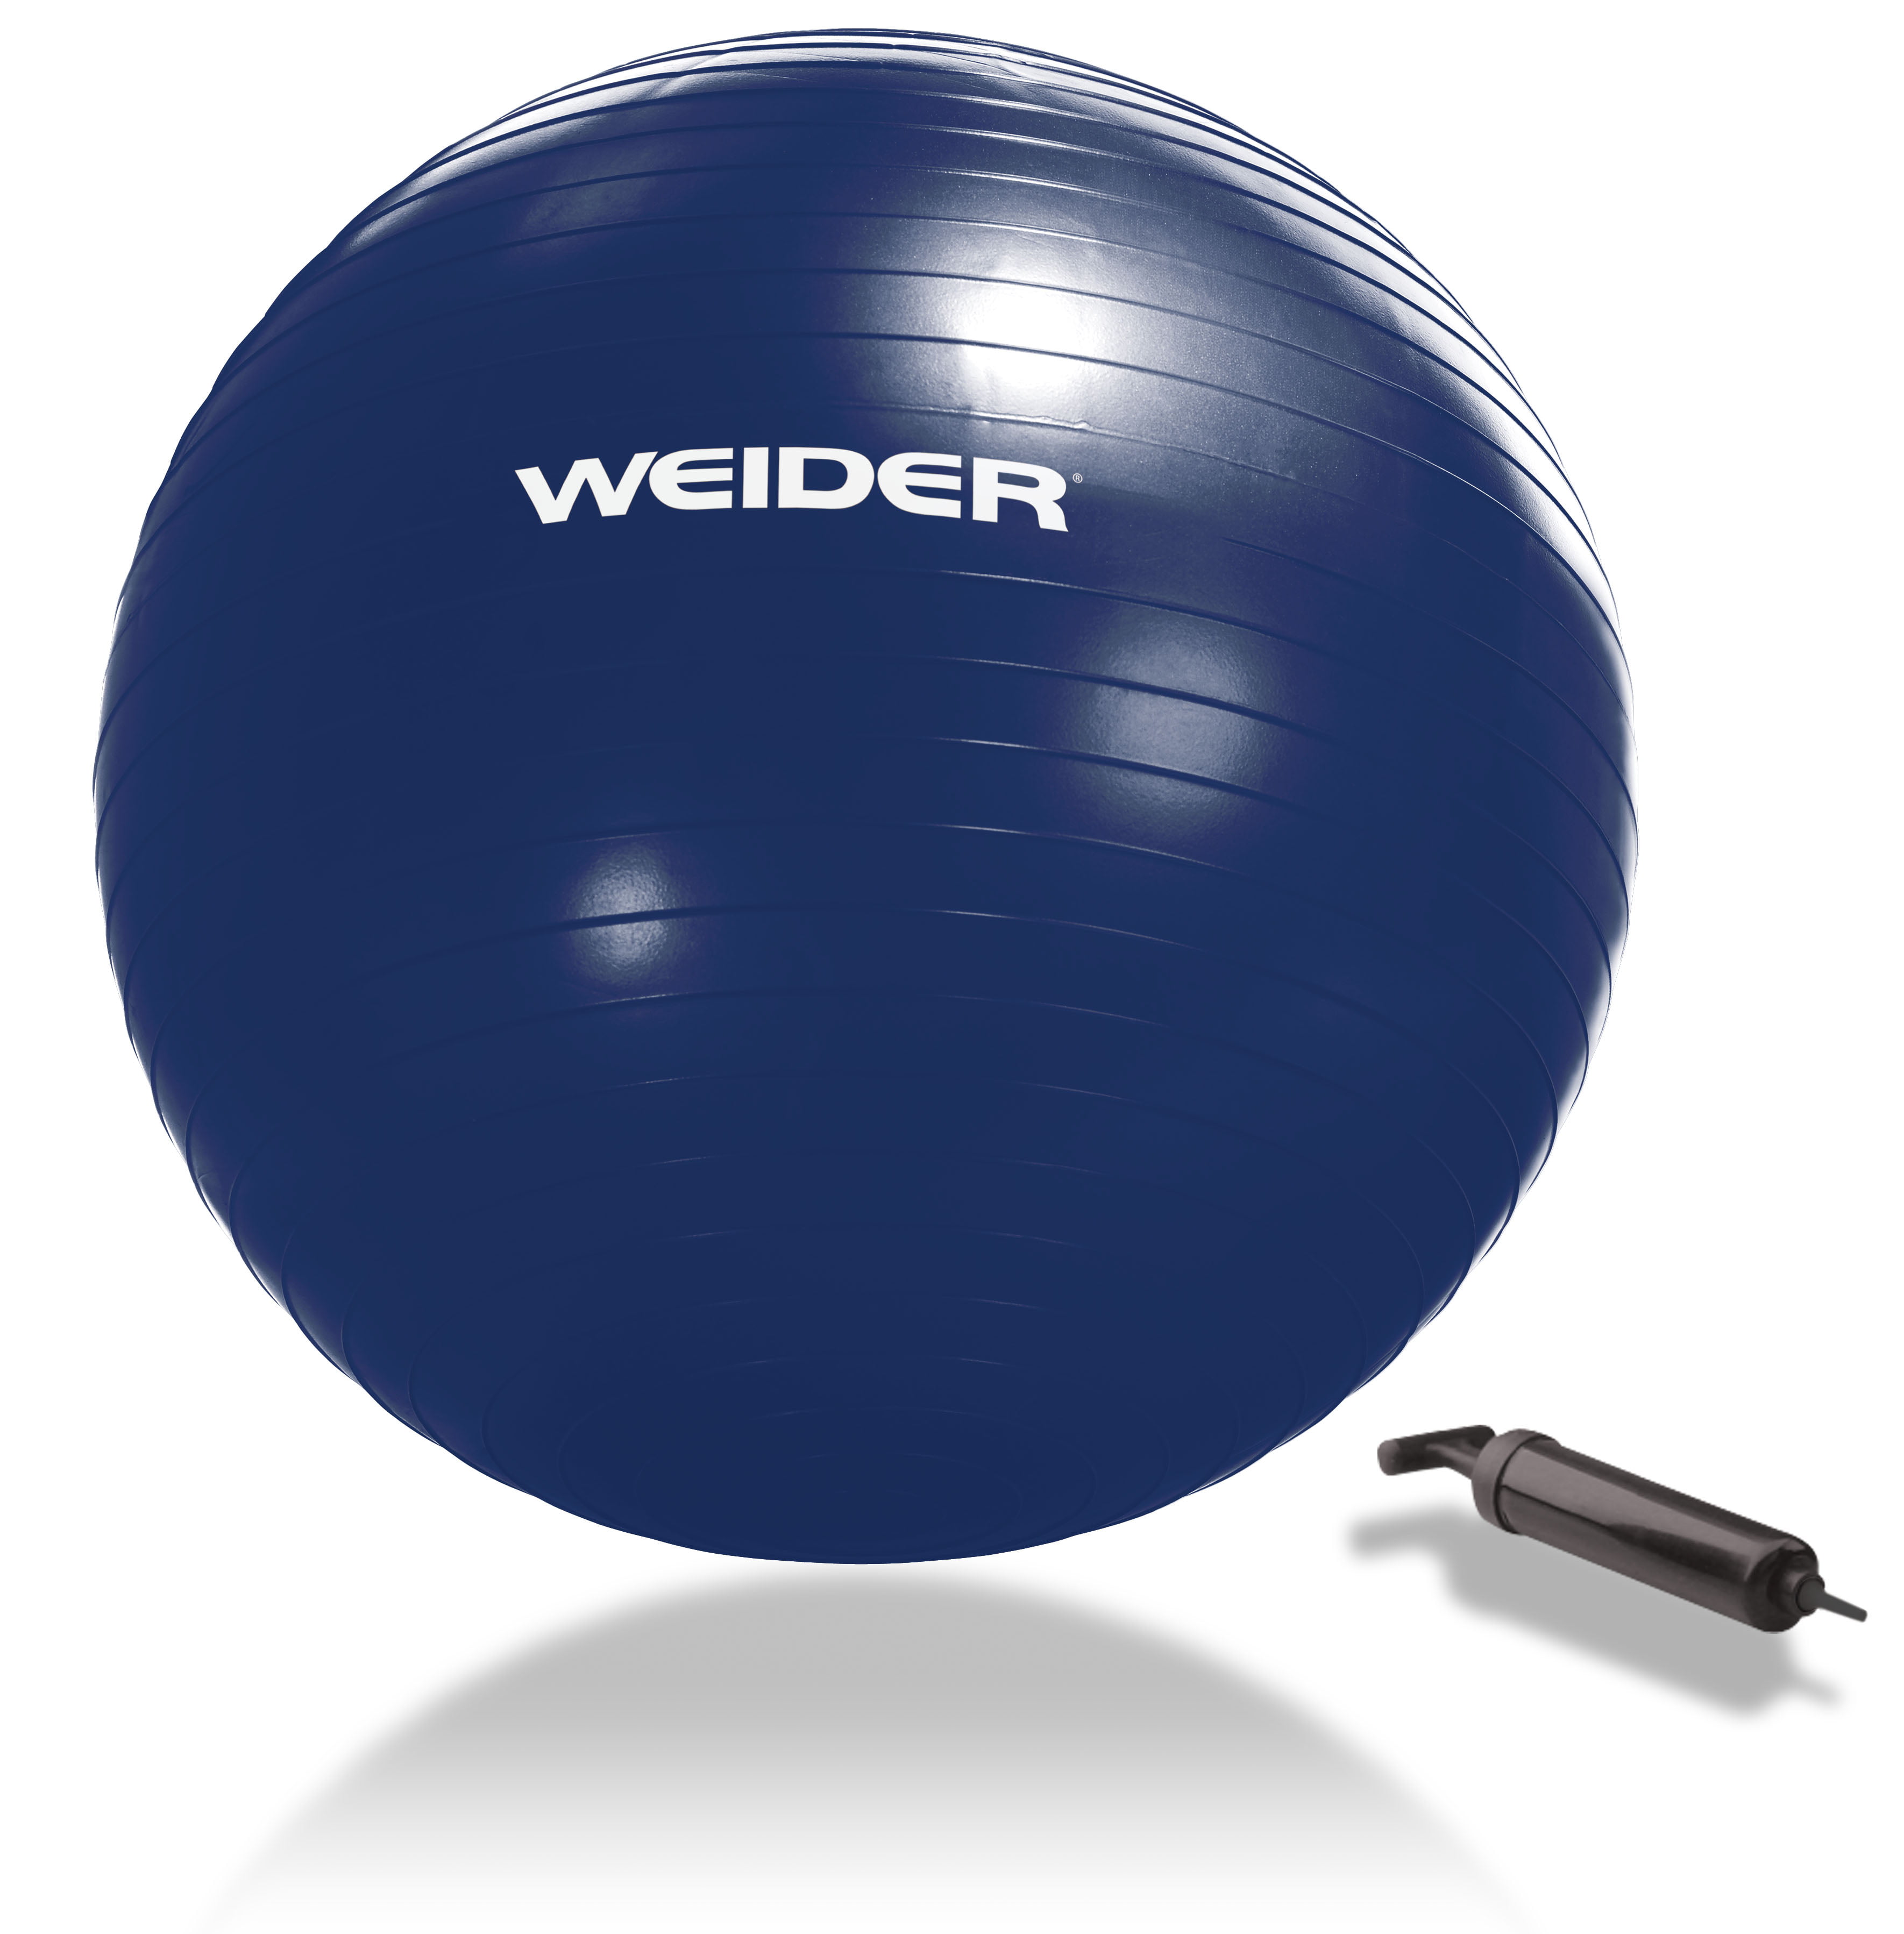 WEIDER  FITNESS EXERCISE CHAIR Buy 1 - GET 1 FREE PILATES ball SCHOOL ADHD 